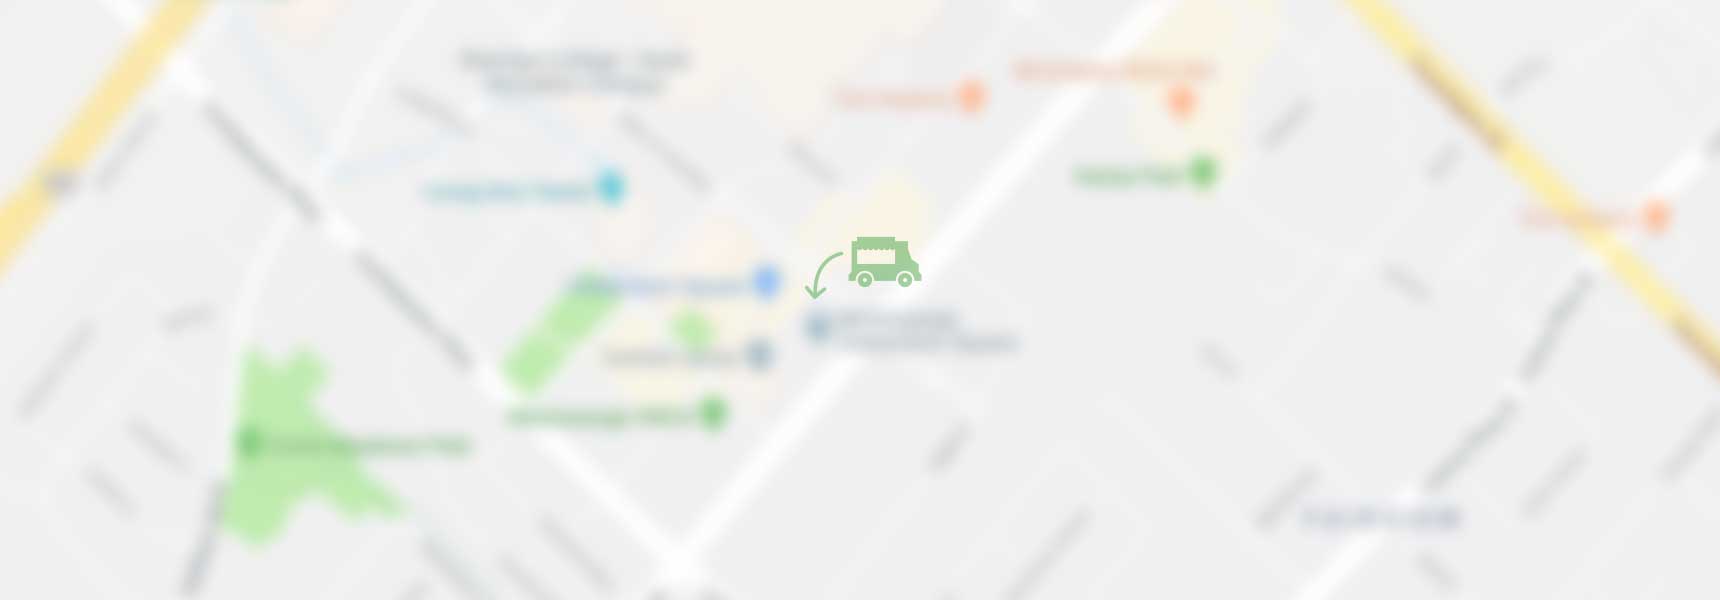 blurred map with food truck icon